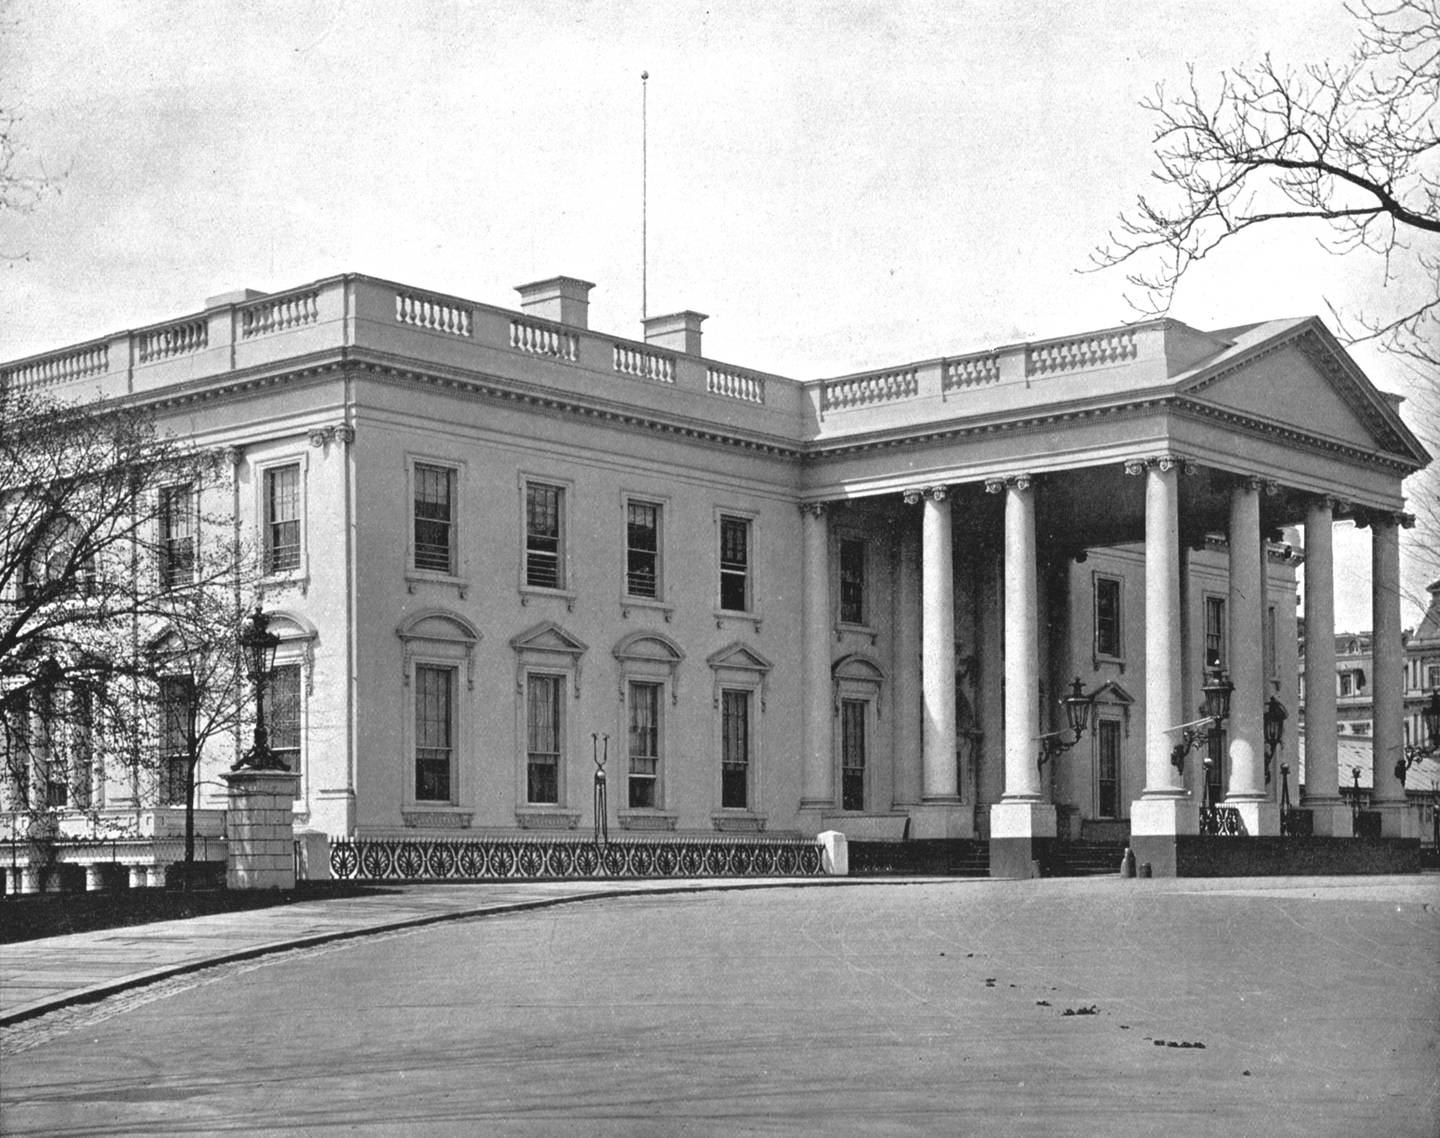 The exterior of the White House circa 1900. Getty Images 